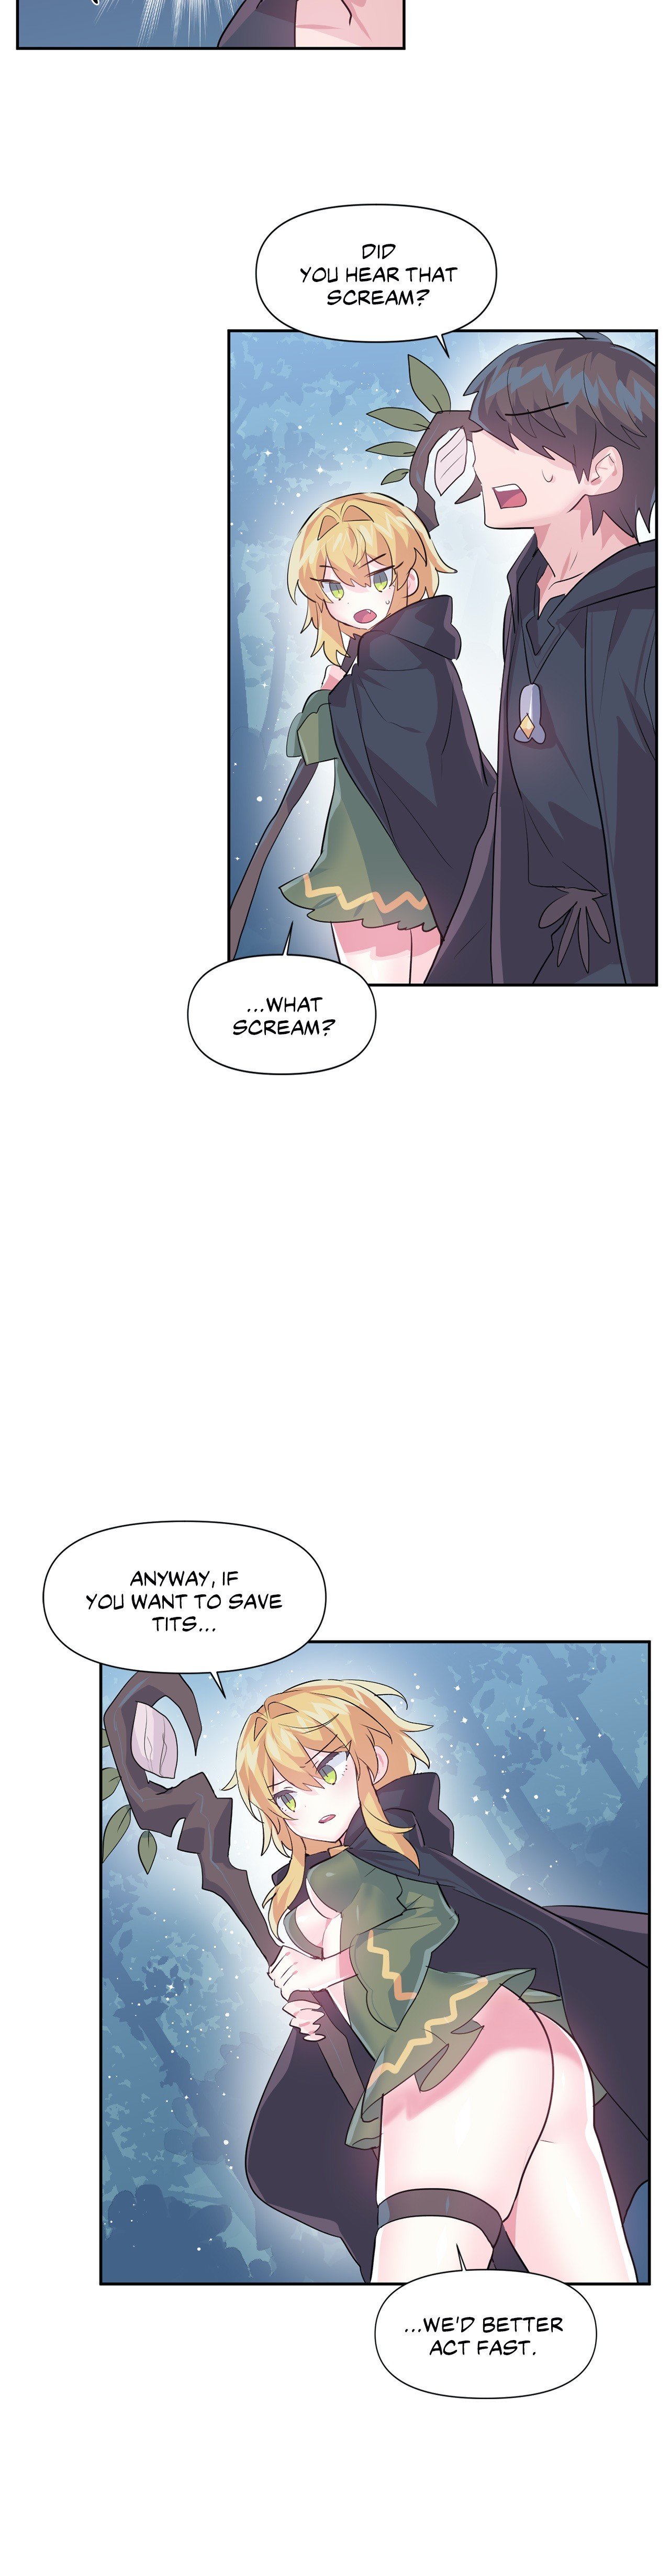 log-in-to-lust-a-land-chap-38-9